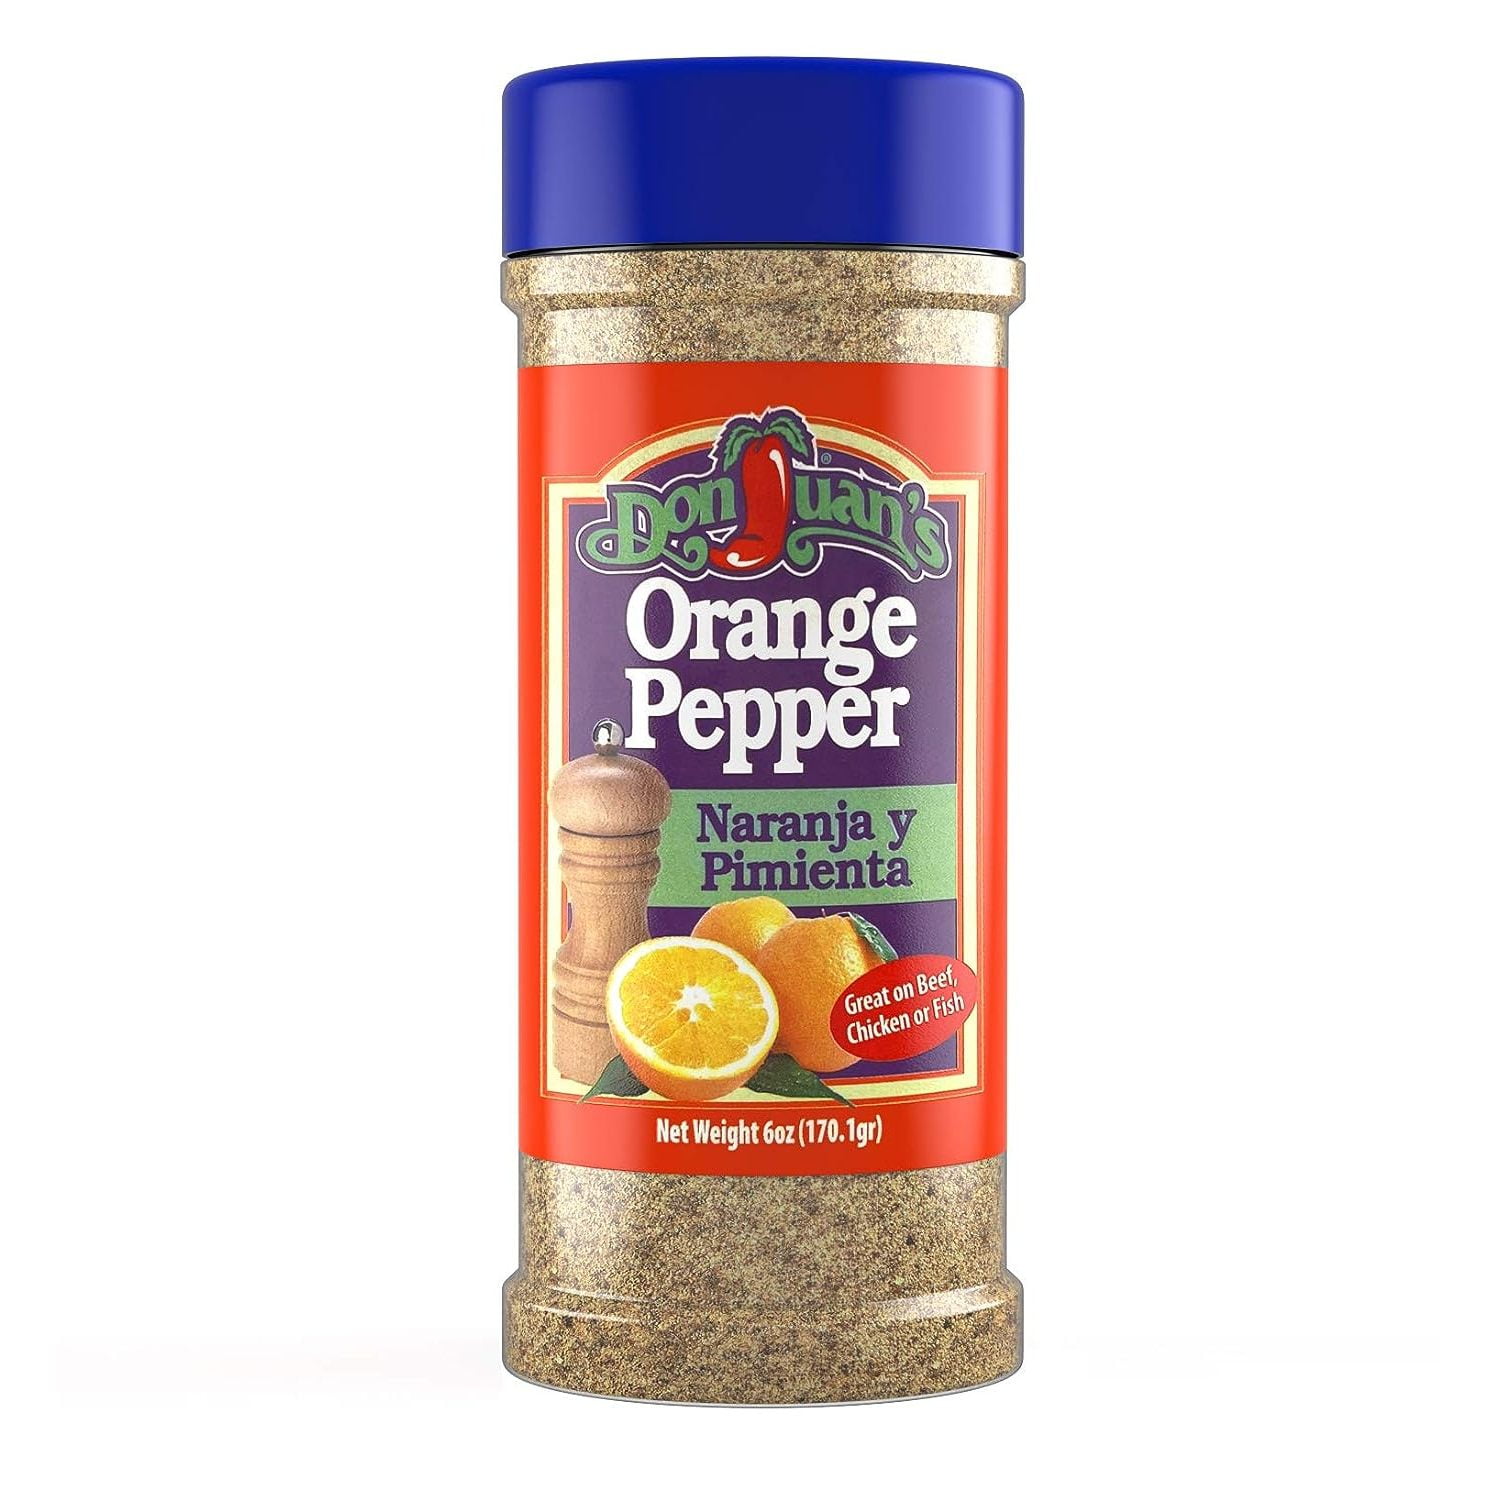 Don Juan’s Orange Pepper, all-purpose TexMex Seasoning (6oz.) the perfect  seasoning for meal preps, chicken and seafood recipes